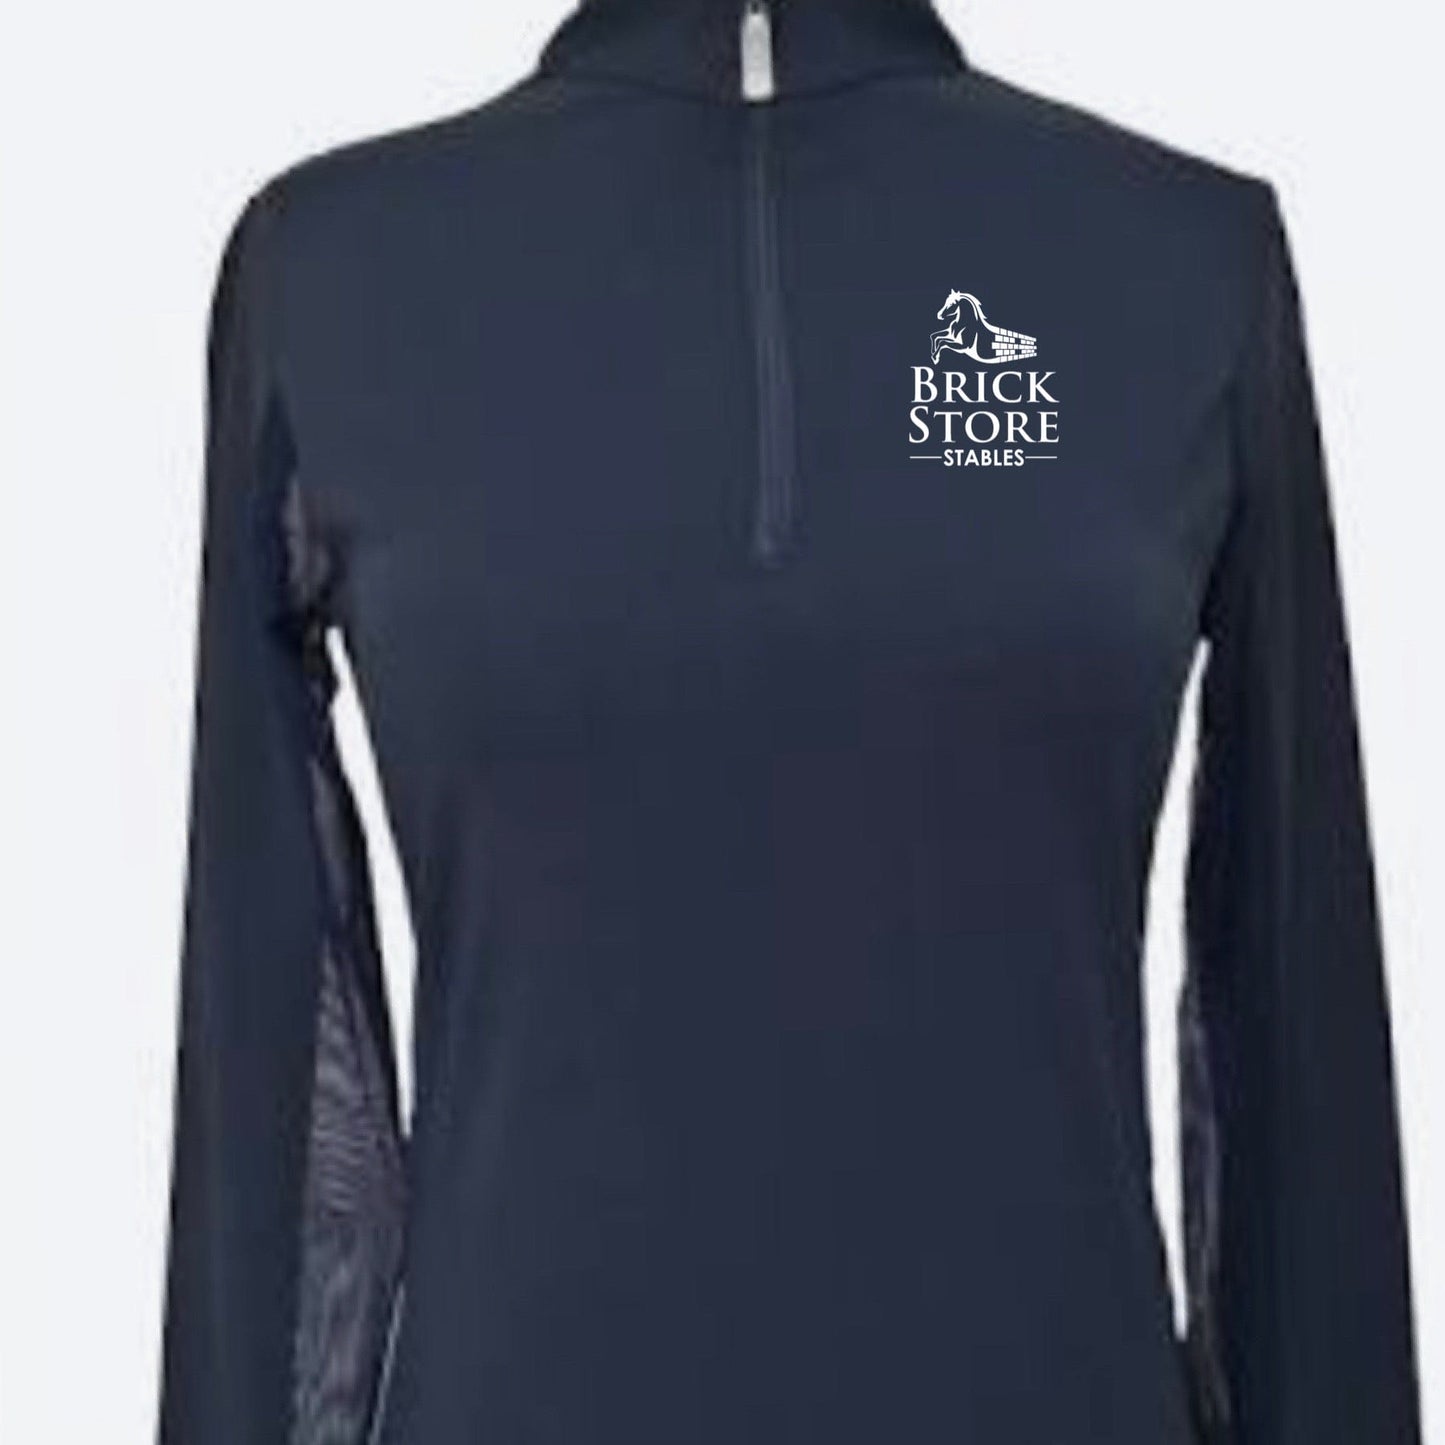 Equestrian Team Apparel Youth S / Navy Brick Store Stables Sun Shirt equestrian team apparel online tack store mobile tack store custom farm apparel custom show stable clothing equestrian lifestyle horse show clothing riding clothes horses equestrian tack store